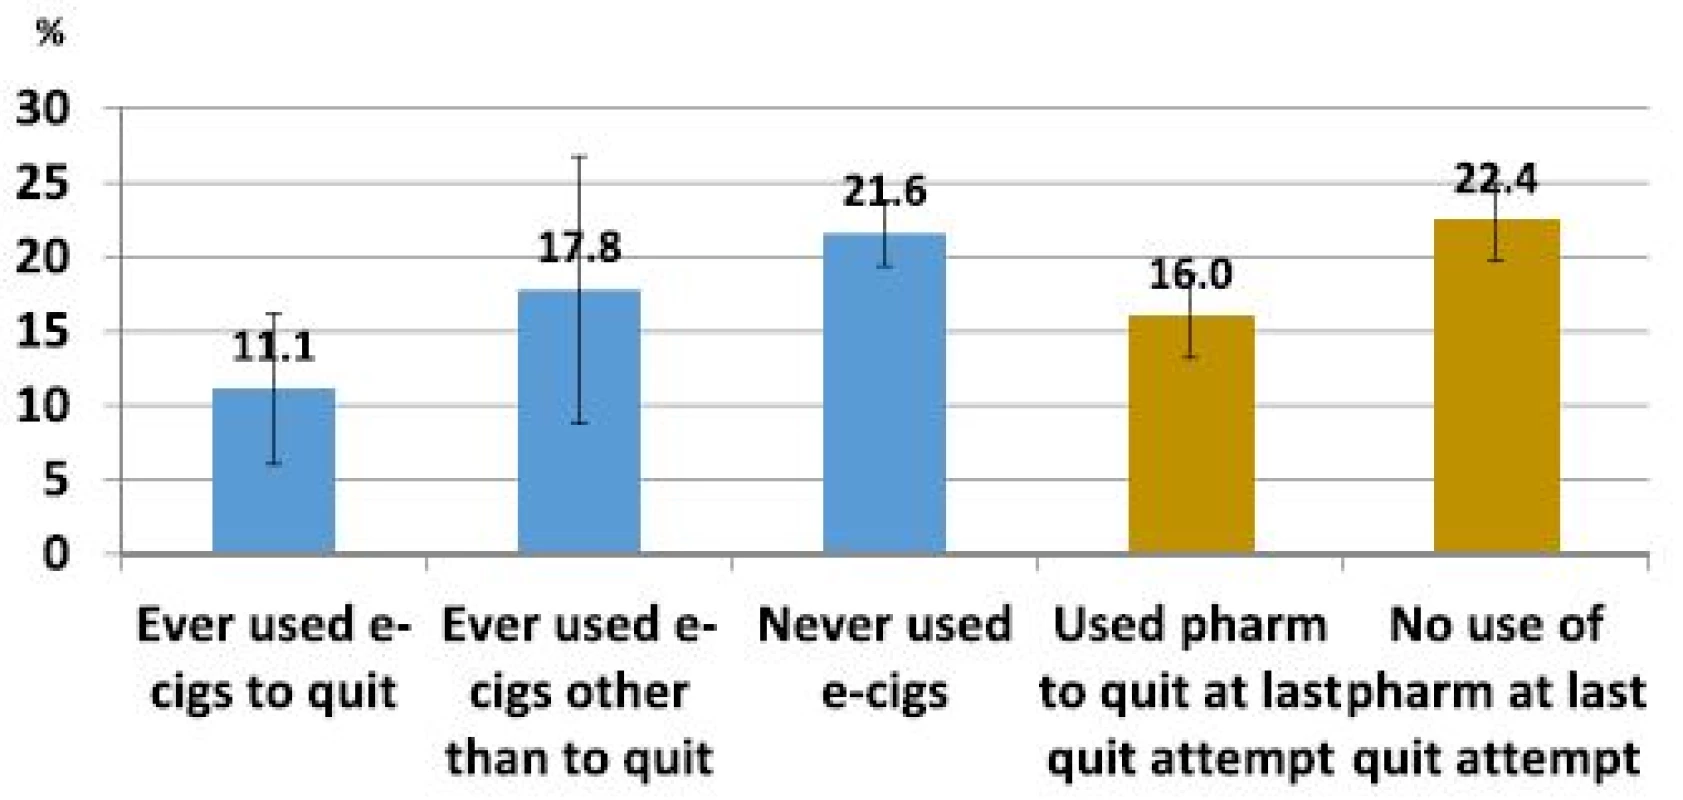 Percentage of smokers with 30+ day cessation at follow-up, among those who made a quit attempt